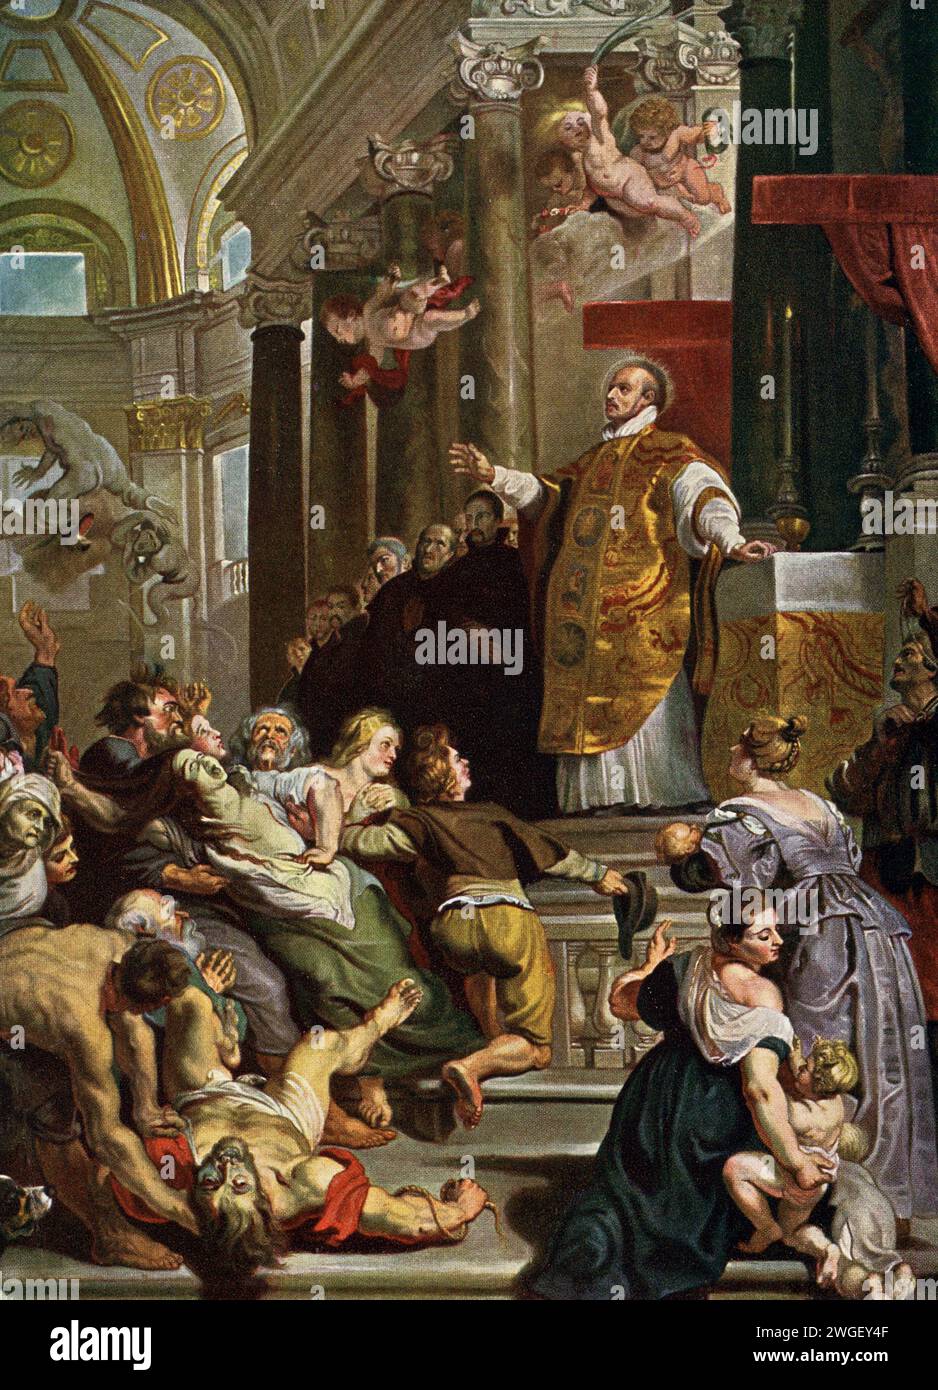 This painting by Peter Paul Rubens (1577-1640) shows Ignatius Loyola healing those who are obsessed. It is often titled: Miracles of Saint Ignatius of Loyola. It hung in Belgium on the high altar of Antwerp’s Jesuit Church. Ignatius of Loyola, was a Spanish Catholic priest and theologian, who, with six companions. He founded the religious order of the Society of Jesus, and became its first Superior General, in Paris in 1541. Peter Paul Rubens (died 1640) was a Flemish artist and diplomat. He is considered the most influential artist of the Flemish Baroque tradition. Rubens's highly charged com Stock Photo